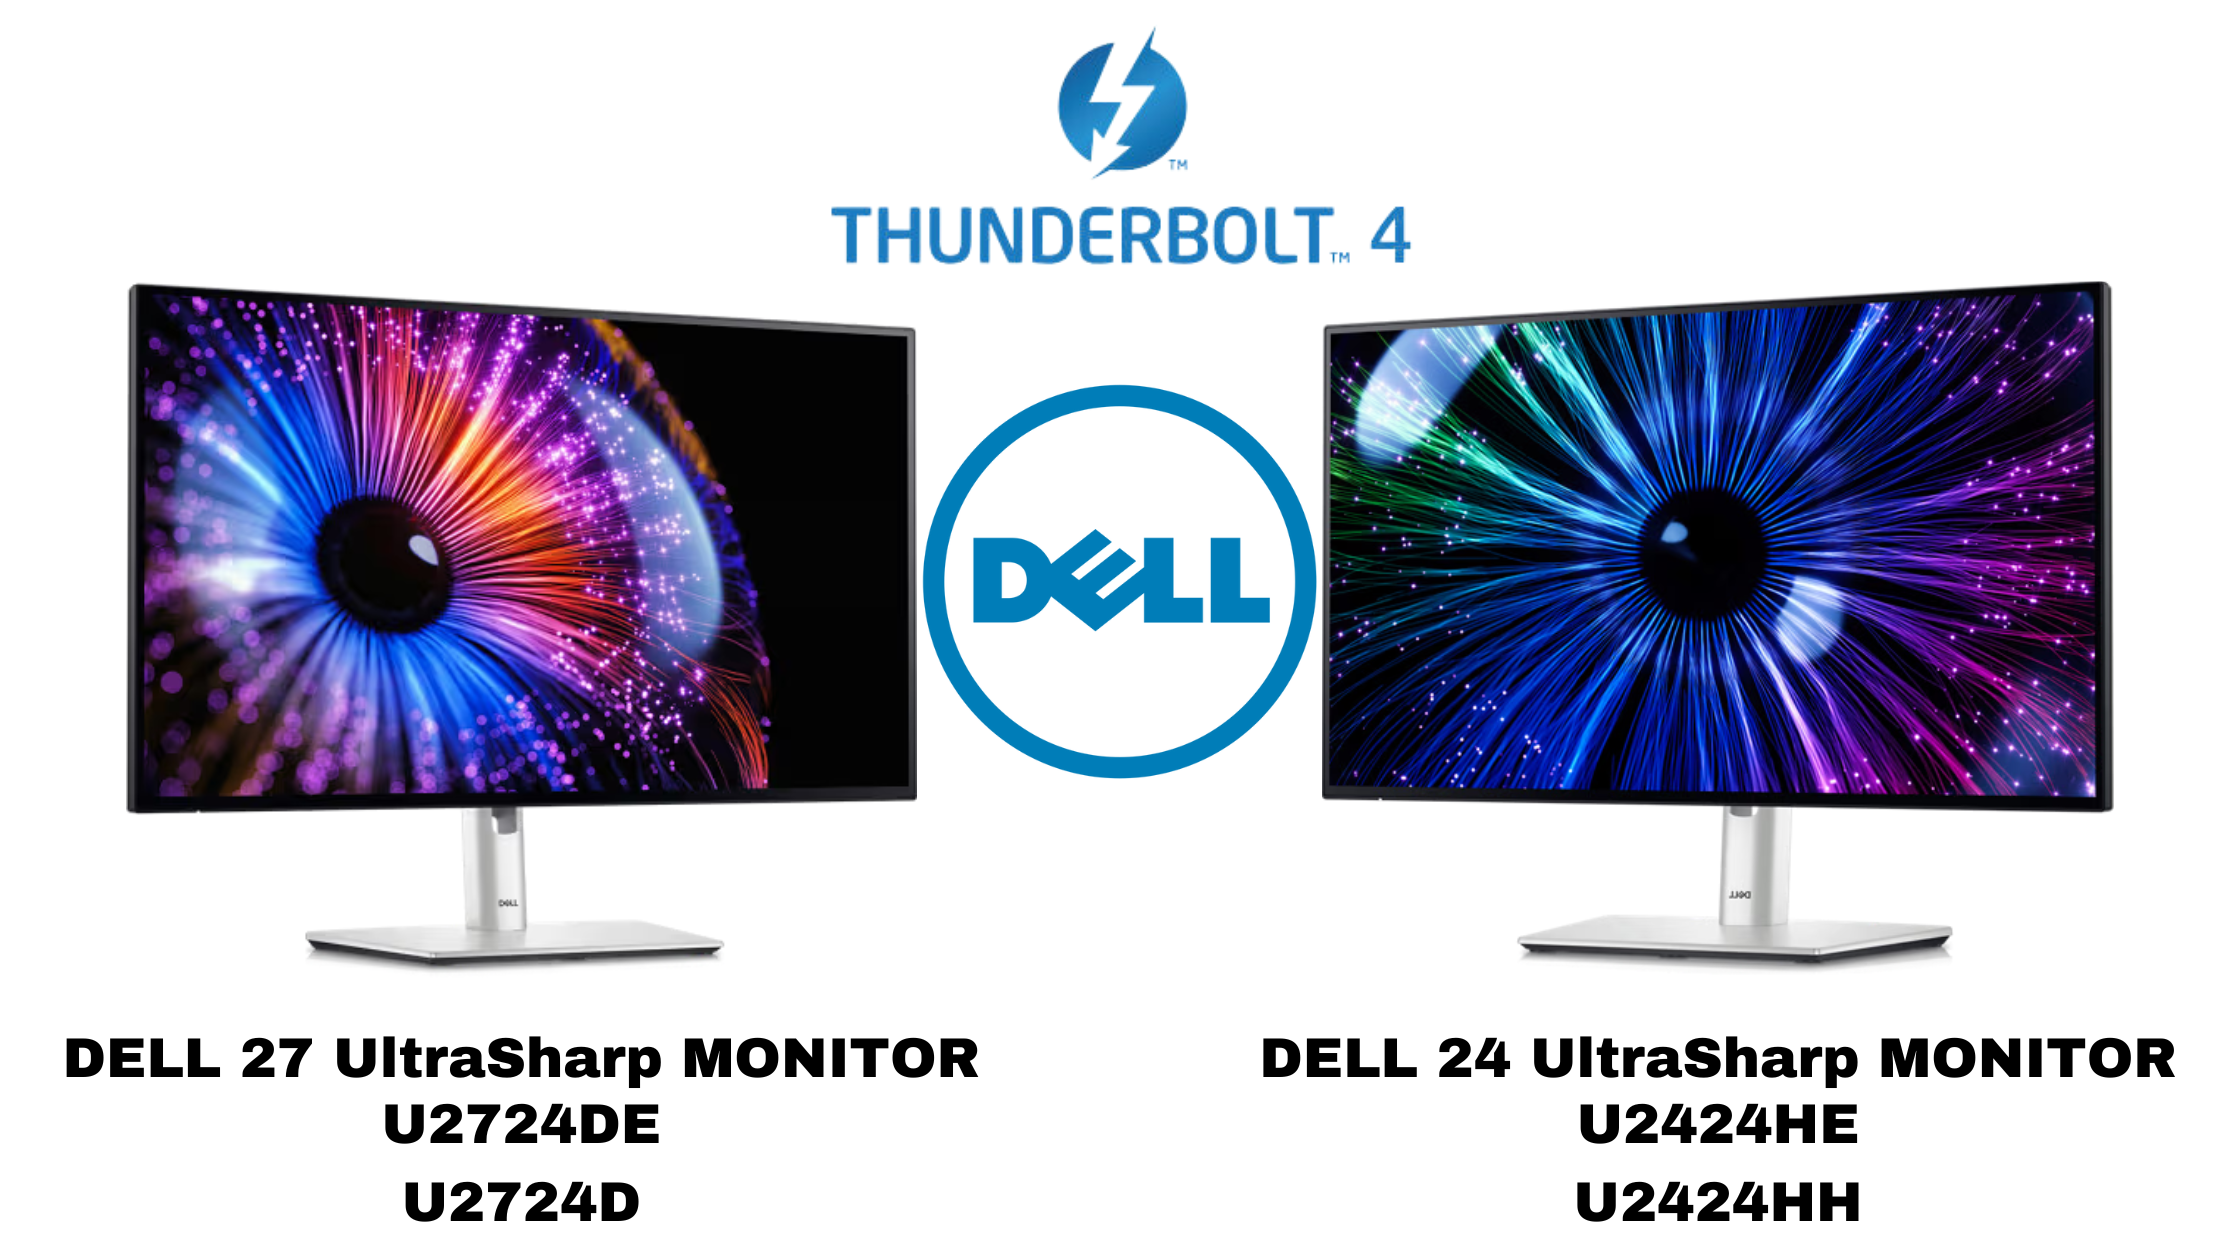 Elevate Your Workspace: Dell UltraSharp Monitors for Enhanced Productivity